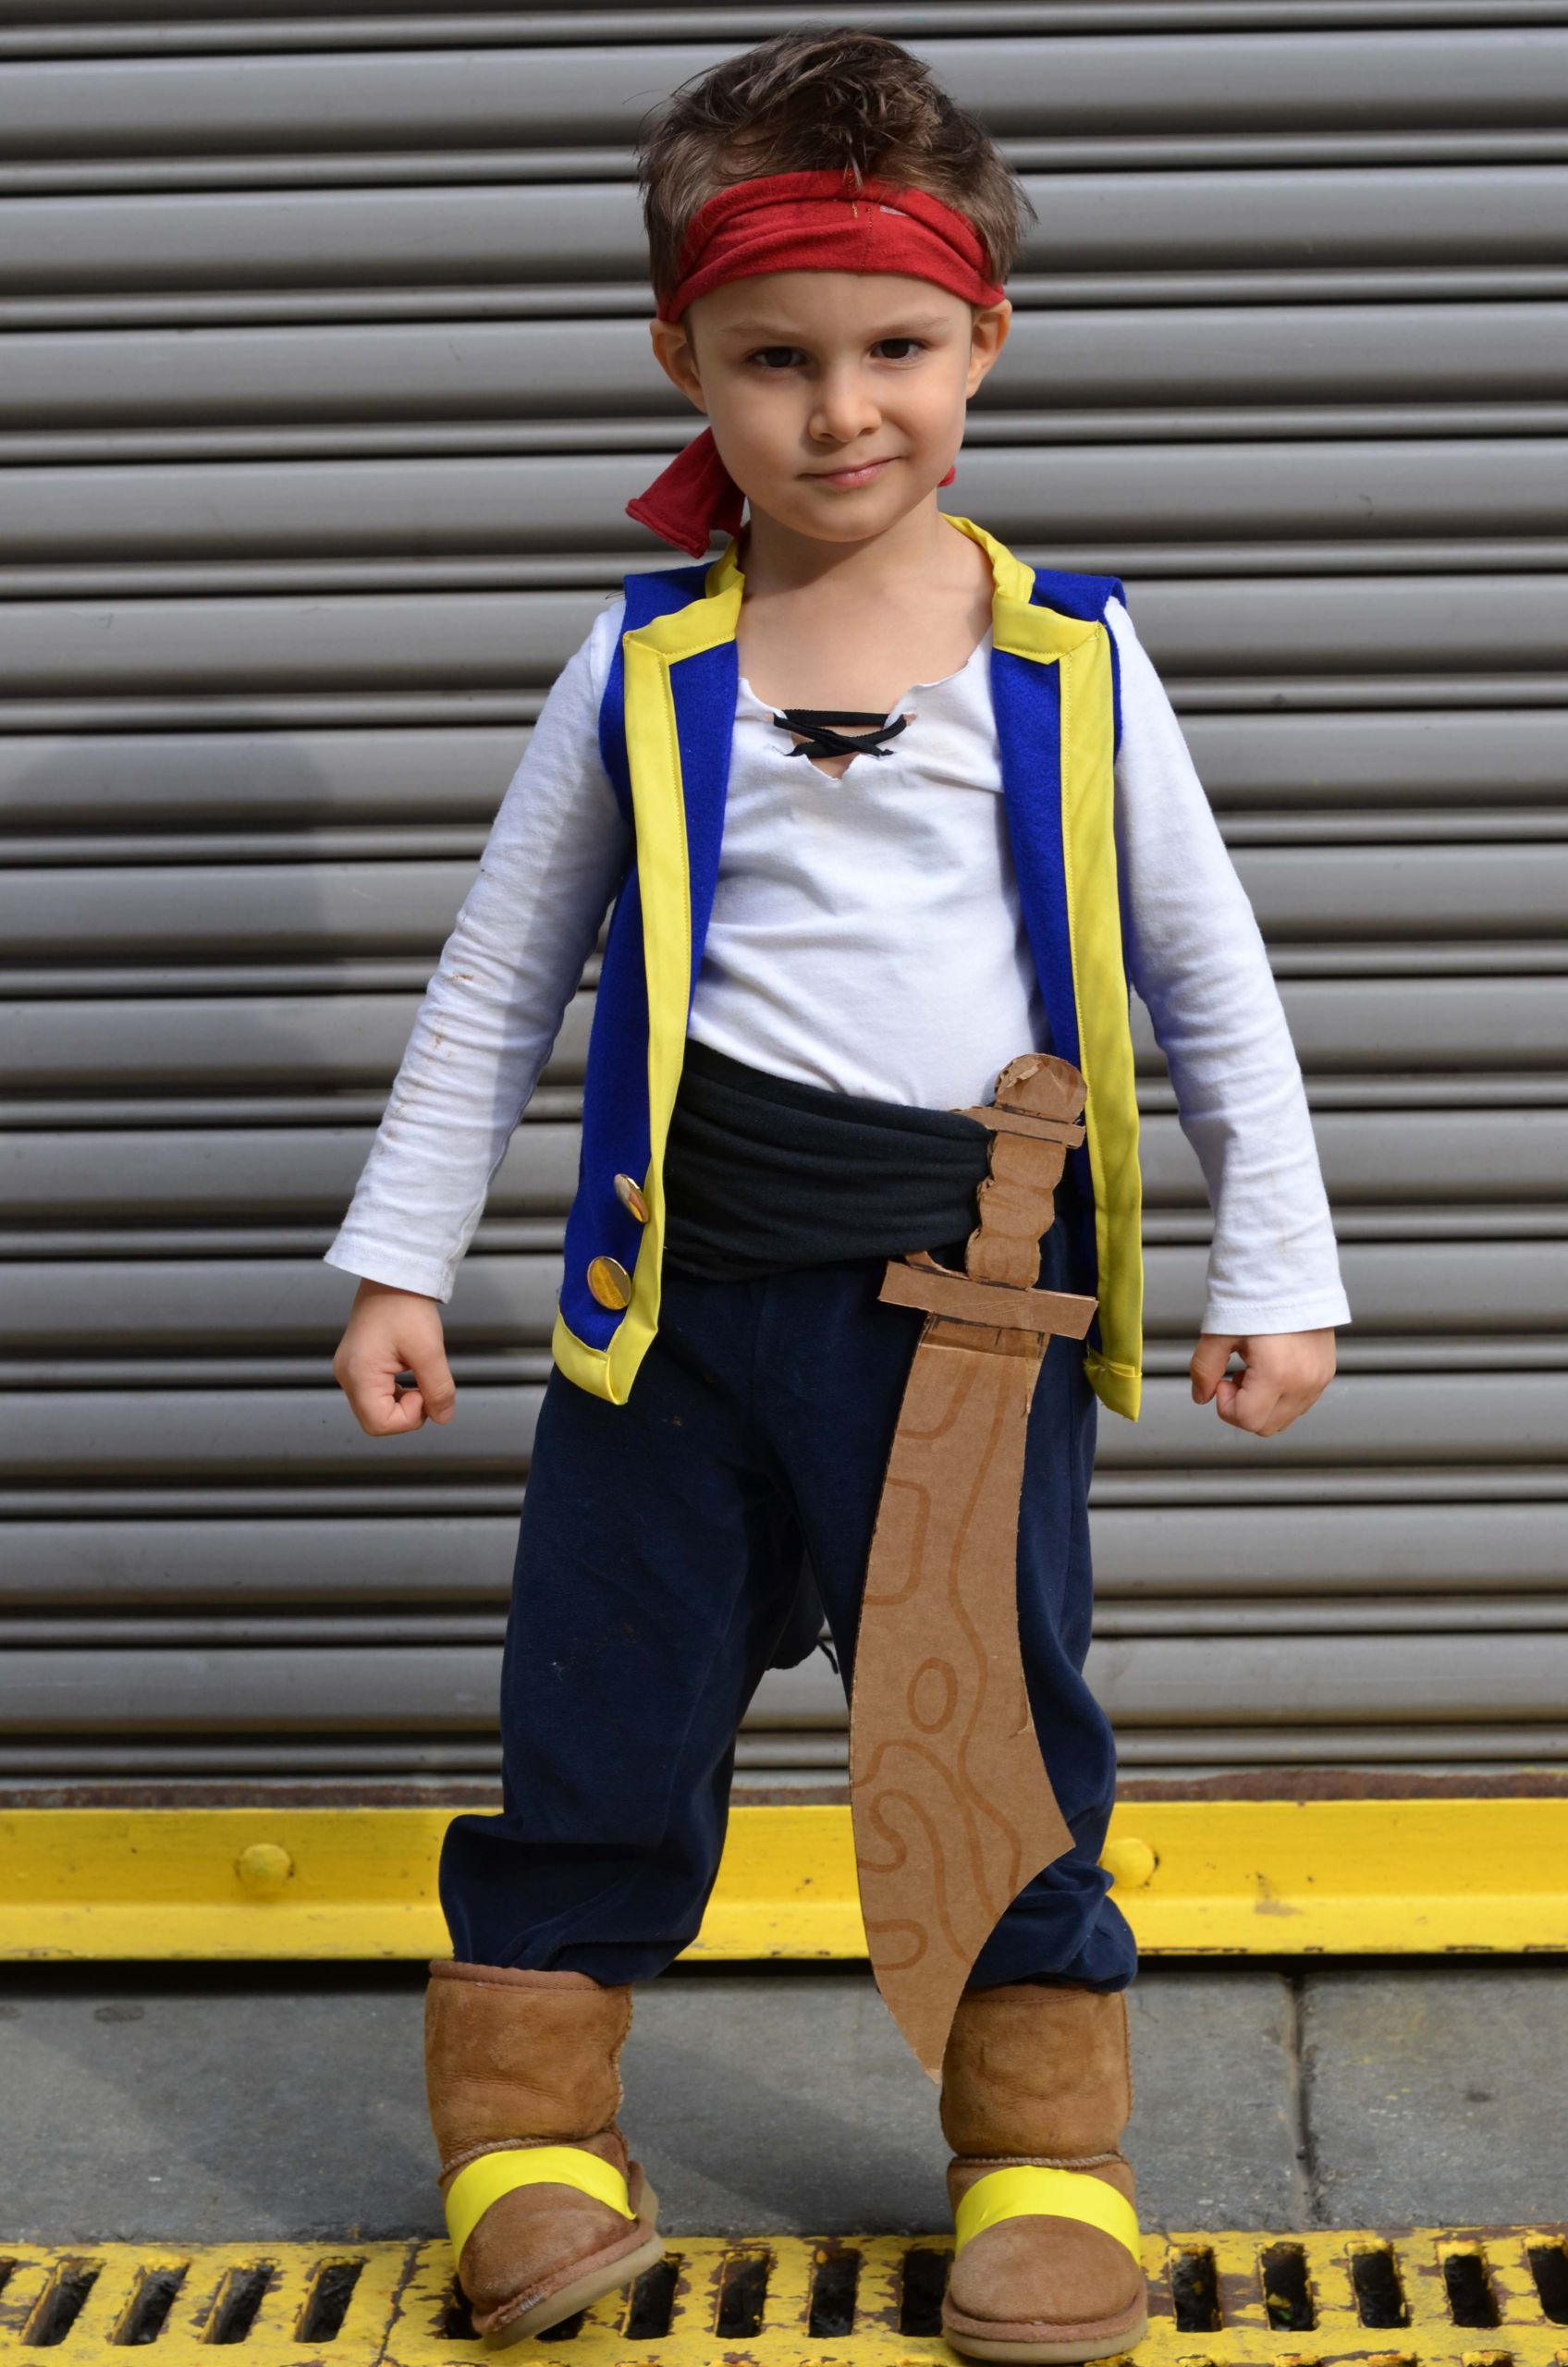 DIY Toddler Pirate Costume
 Jake and The Never Land Pirates